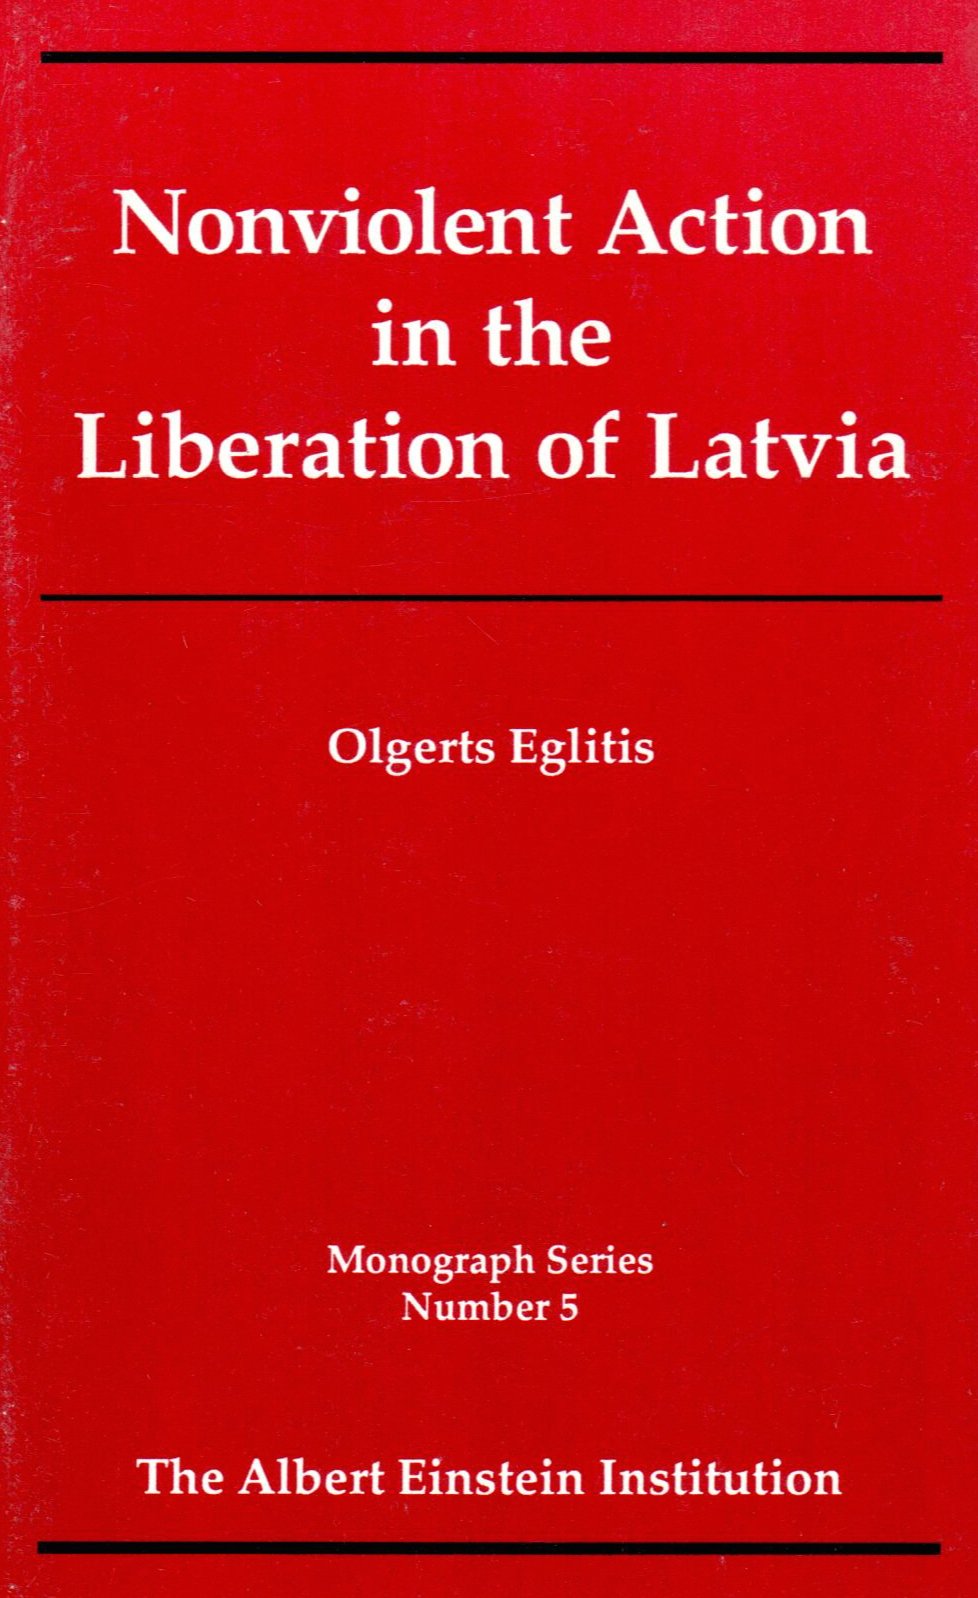 Nonviolent Action in the Liberation of Latvia (1993) by Olgerts Eglitis